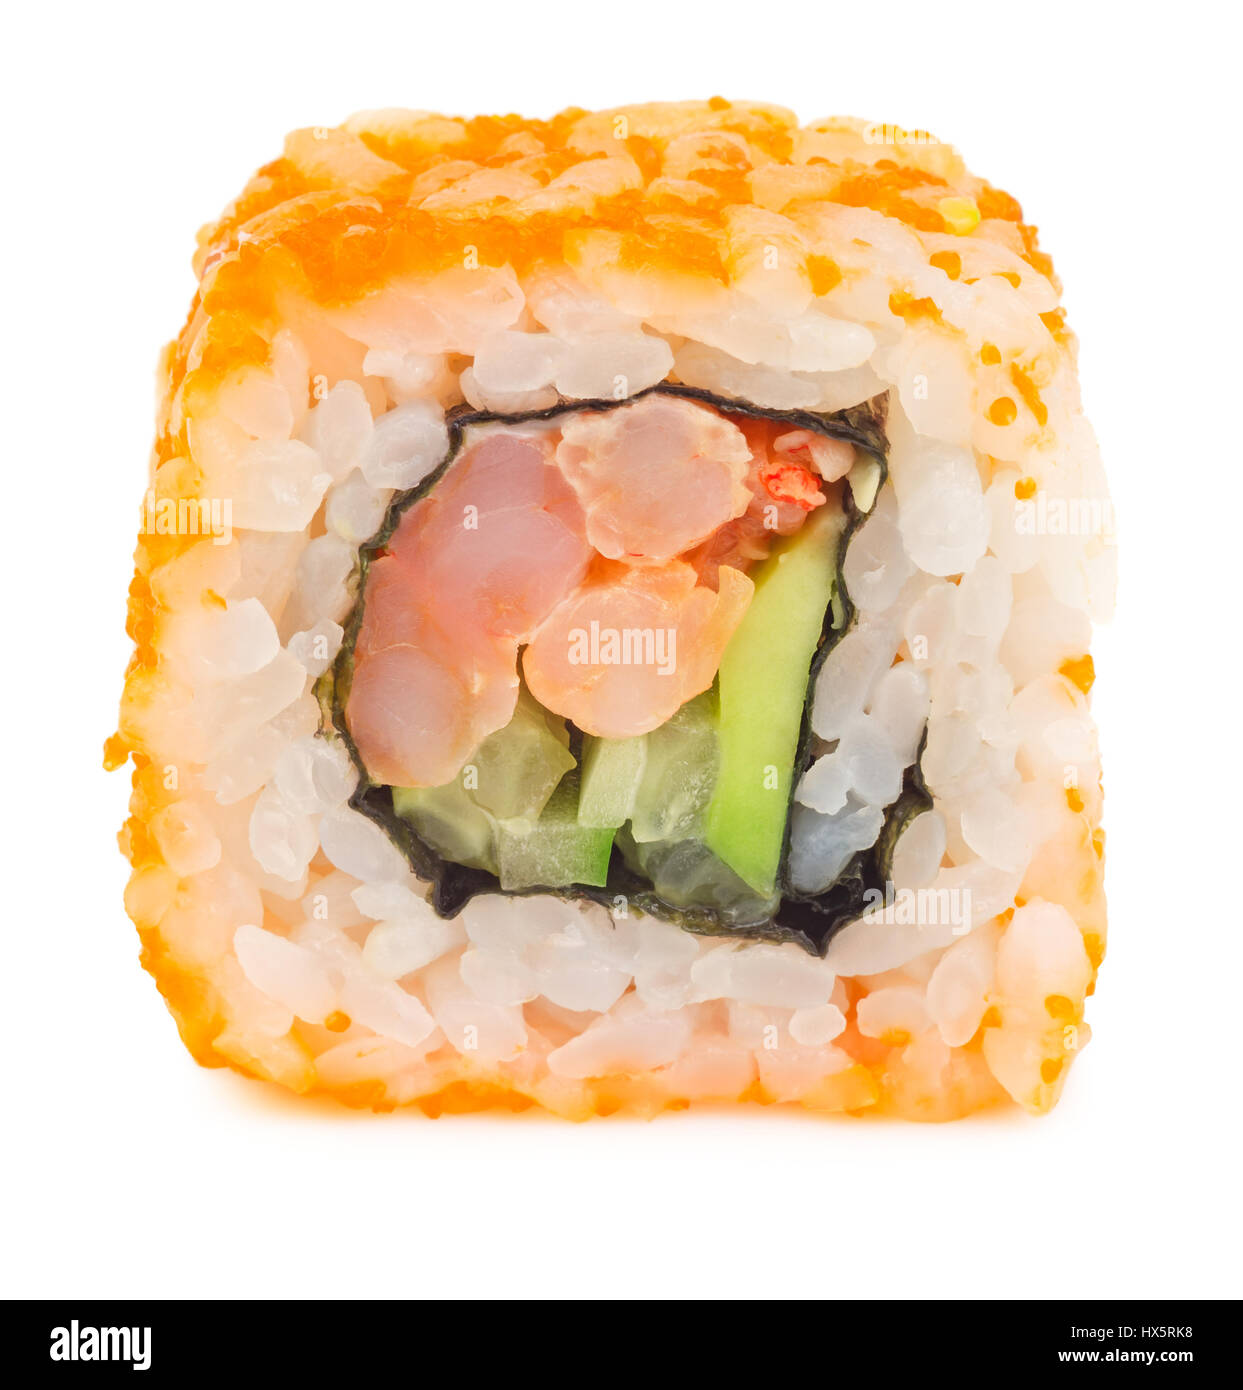 Asian Japanese food. Sushi roll with shrimp, avocado, cucumber, caviar and seaweed. Close up front view isolated on white background. Stock Photo